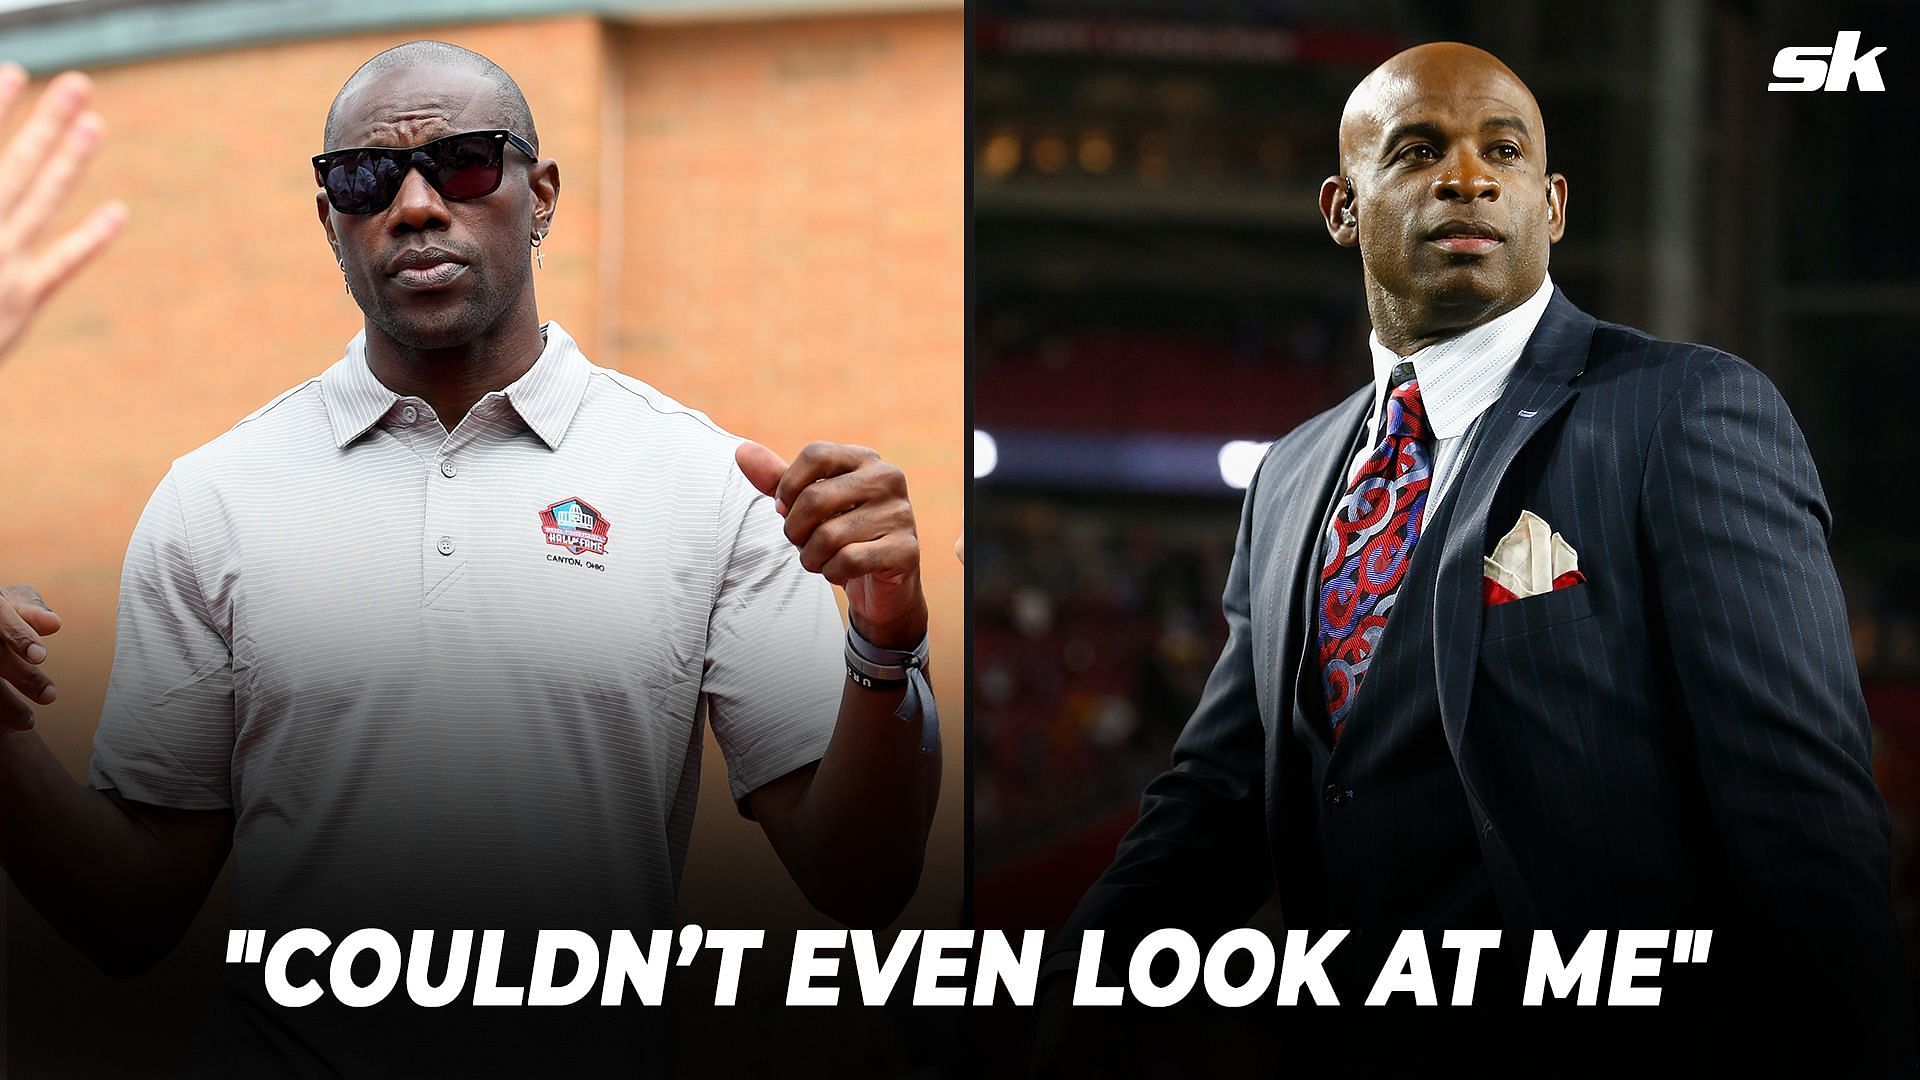 Terrell Owens did not hold back in his response to Deion Sanders